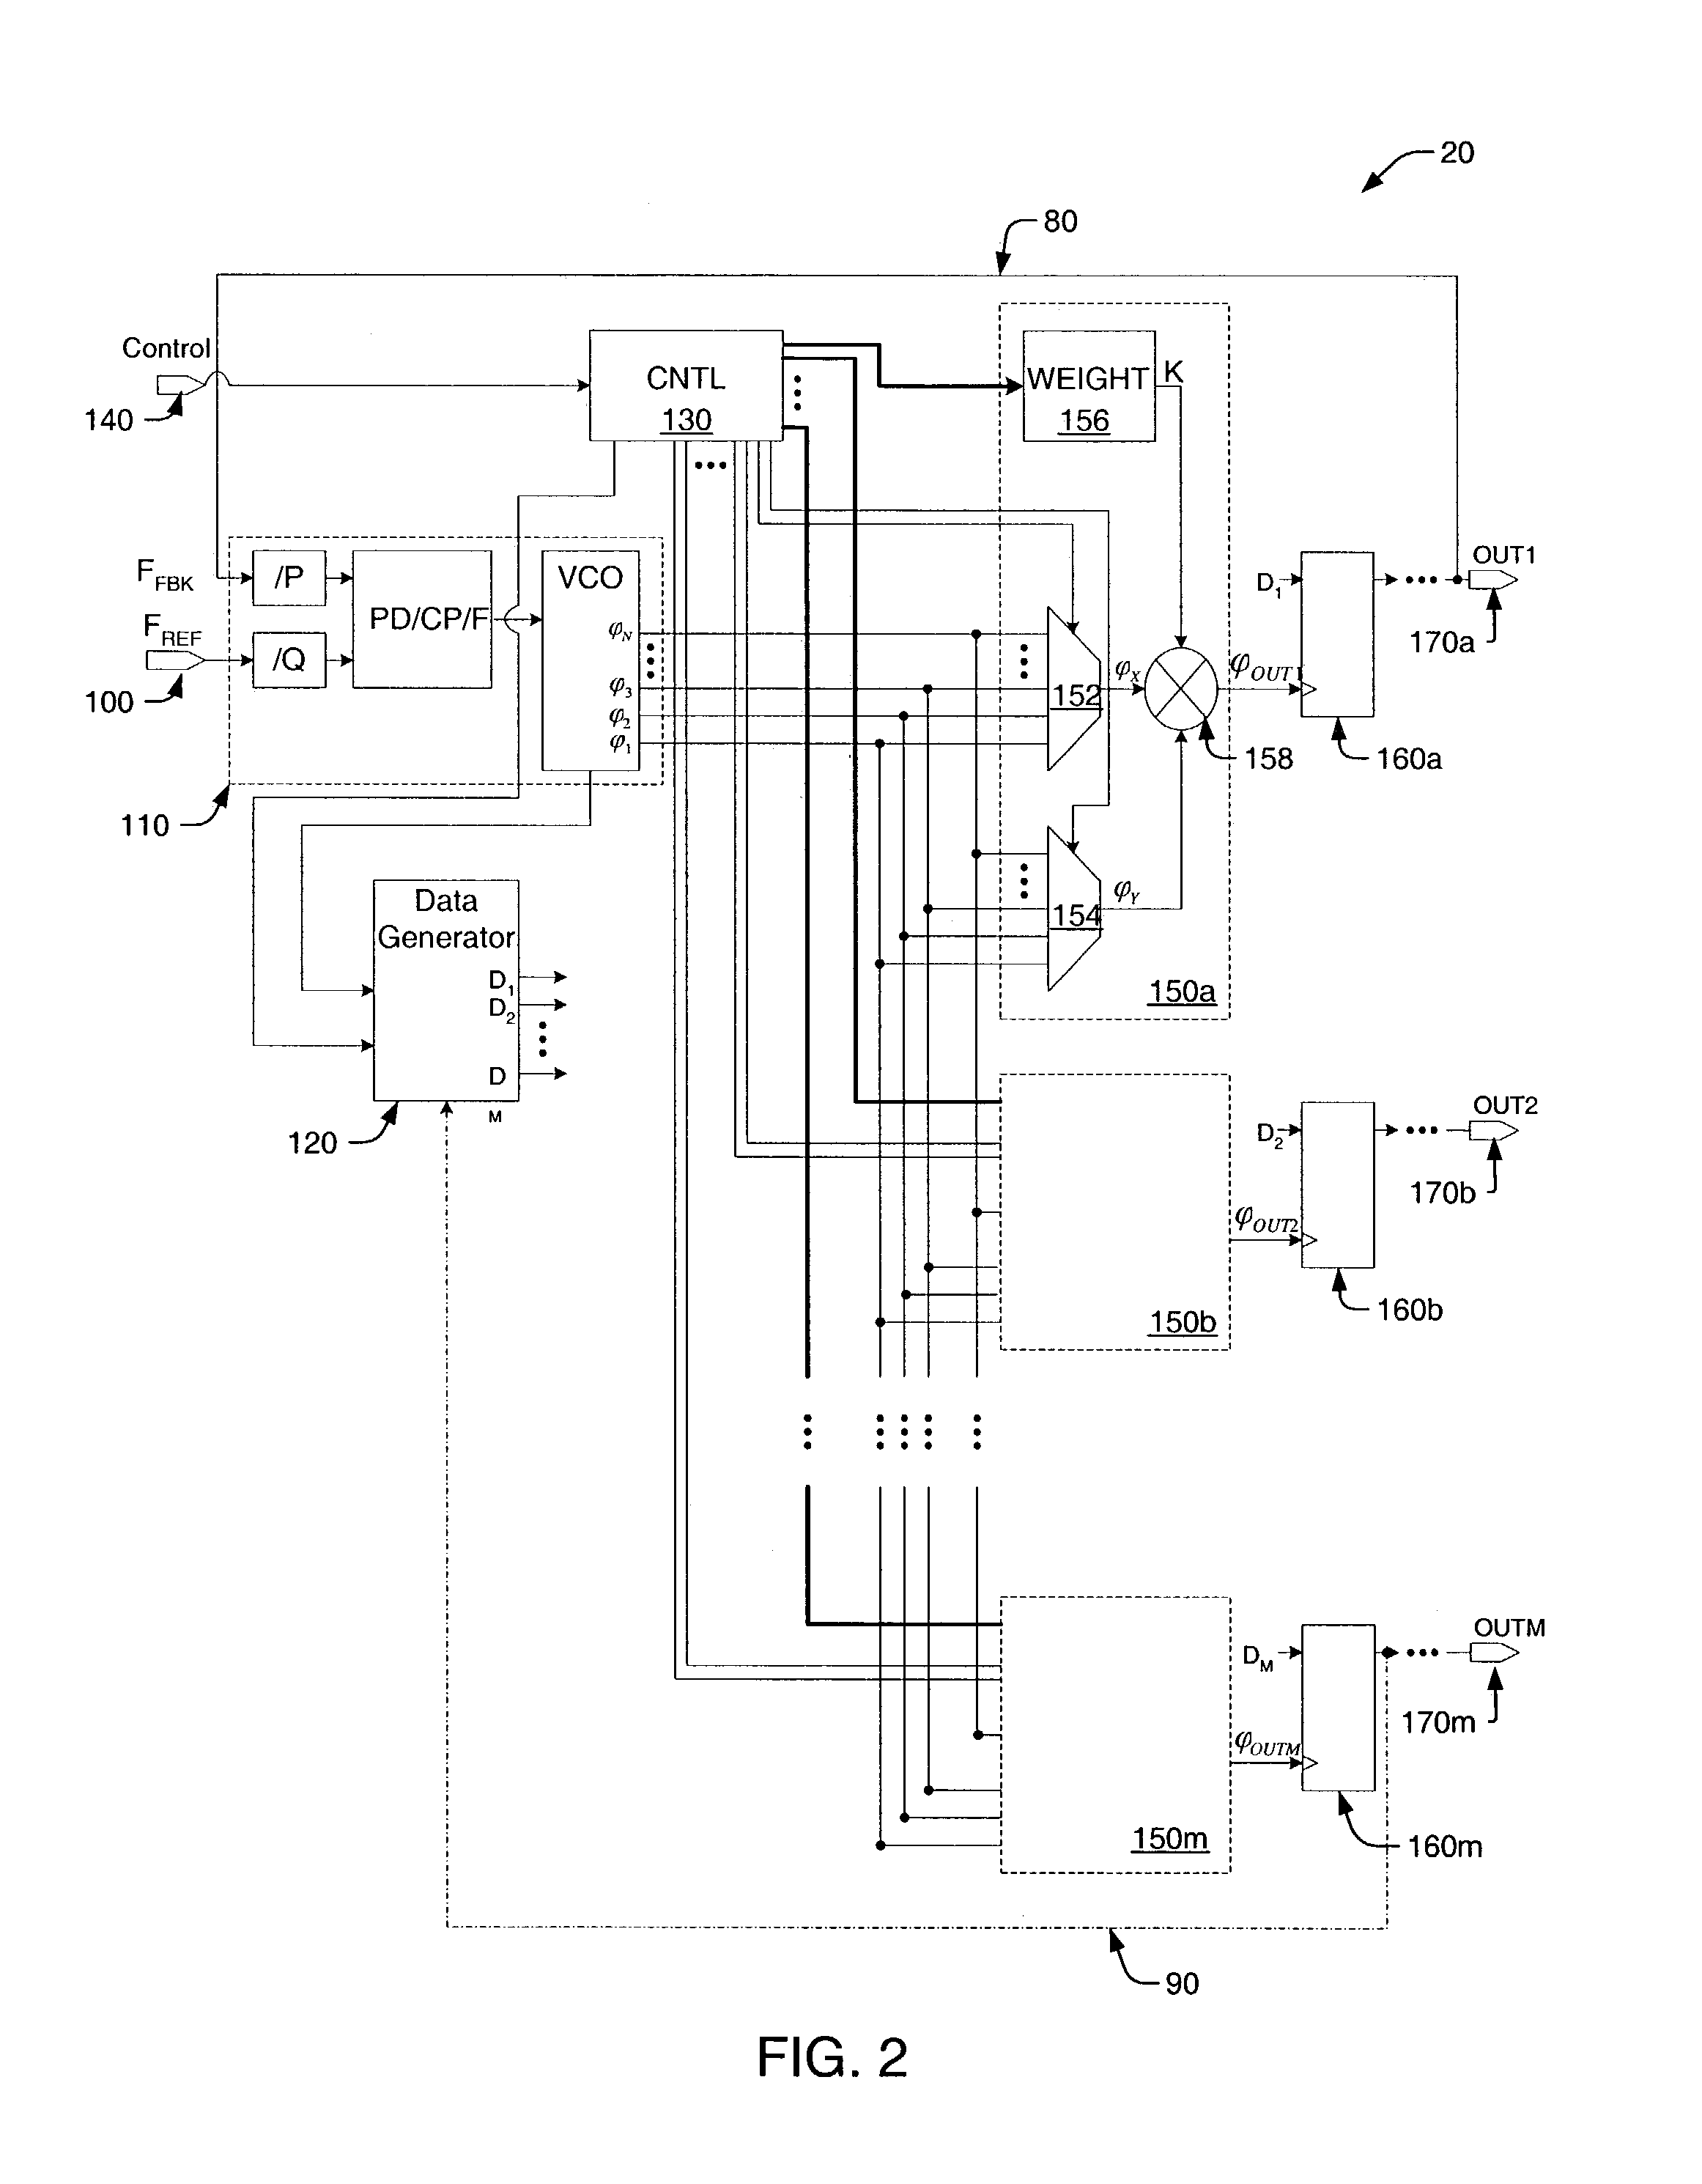 Apparatus, system, and method for synchronizing signals received by one or more system components